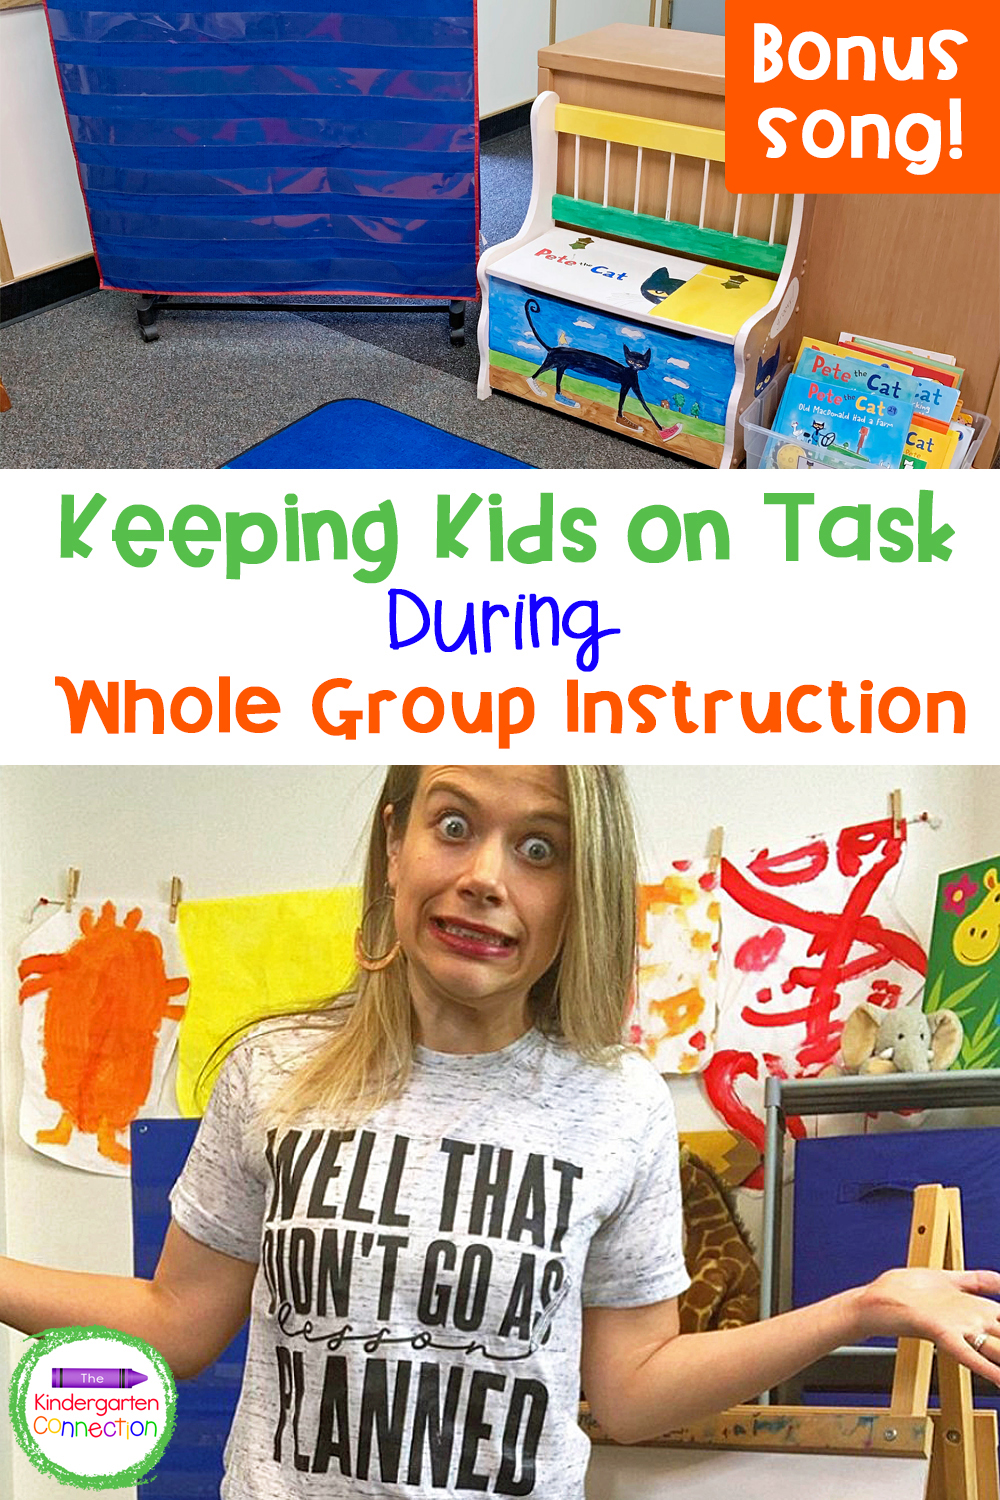 Check out these tips for how to keep kids on task during whole group instruction while still allowing them to feel acknowledged and heard!